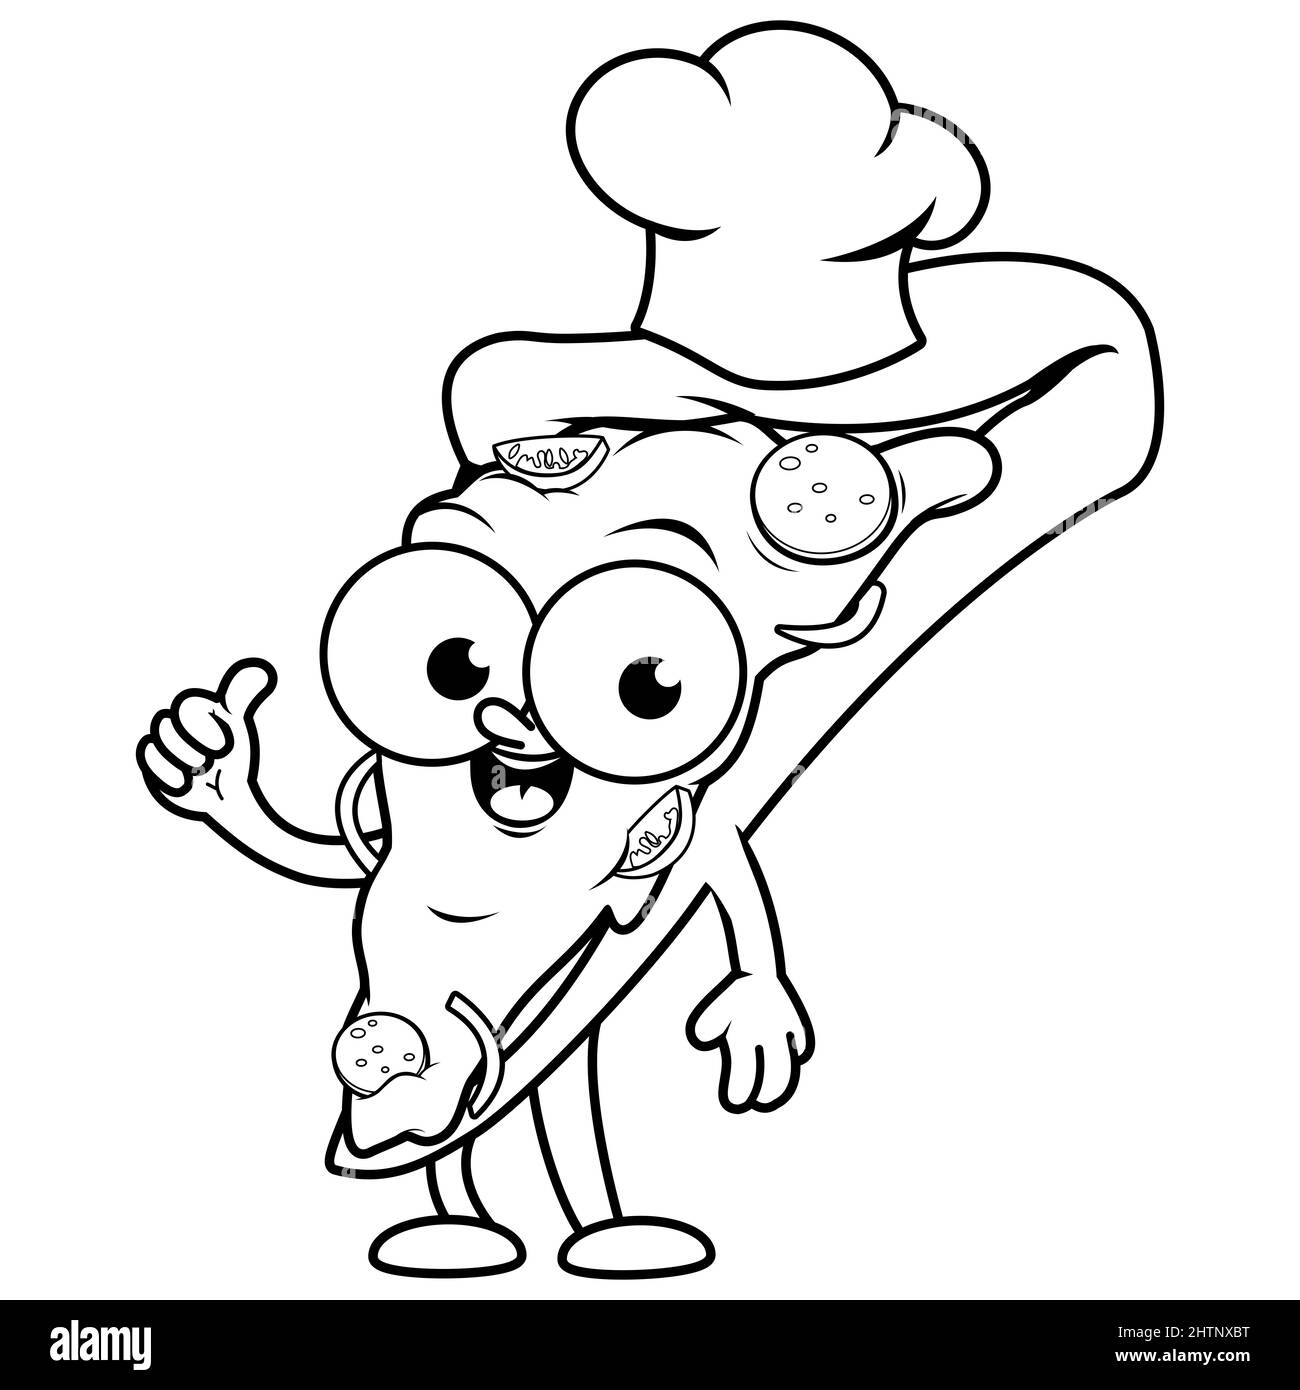 Cartoon pizza slice character with a chef hat. Black and white coloring page Stock Photo